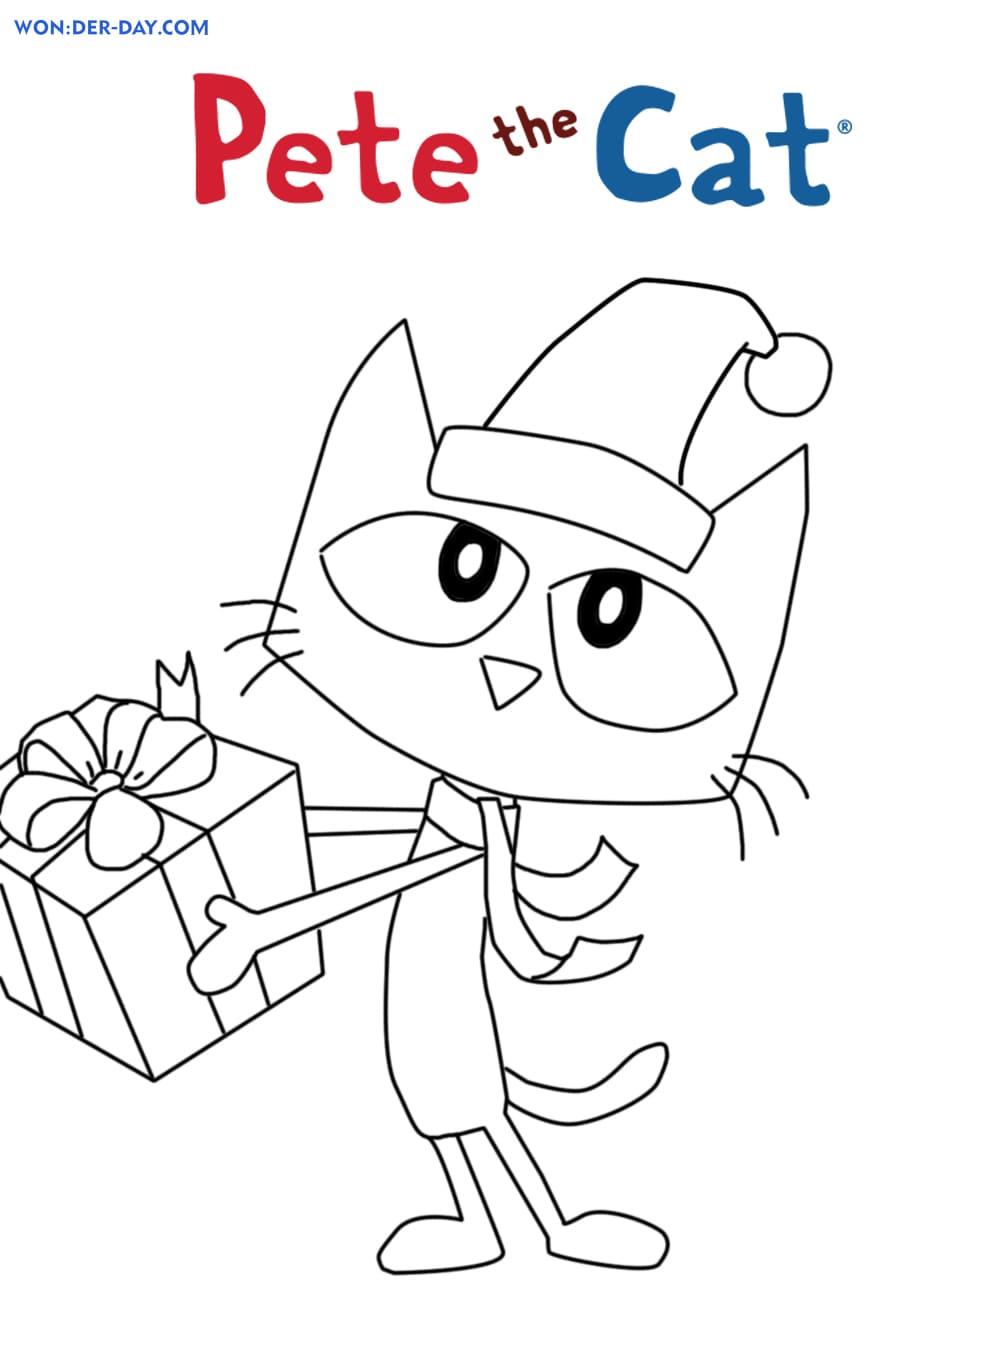 pete-the-cat-printables-free-printable-templates